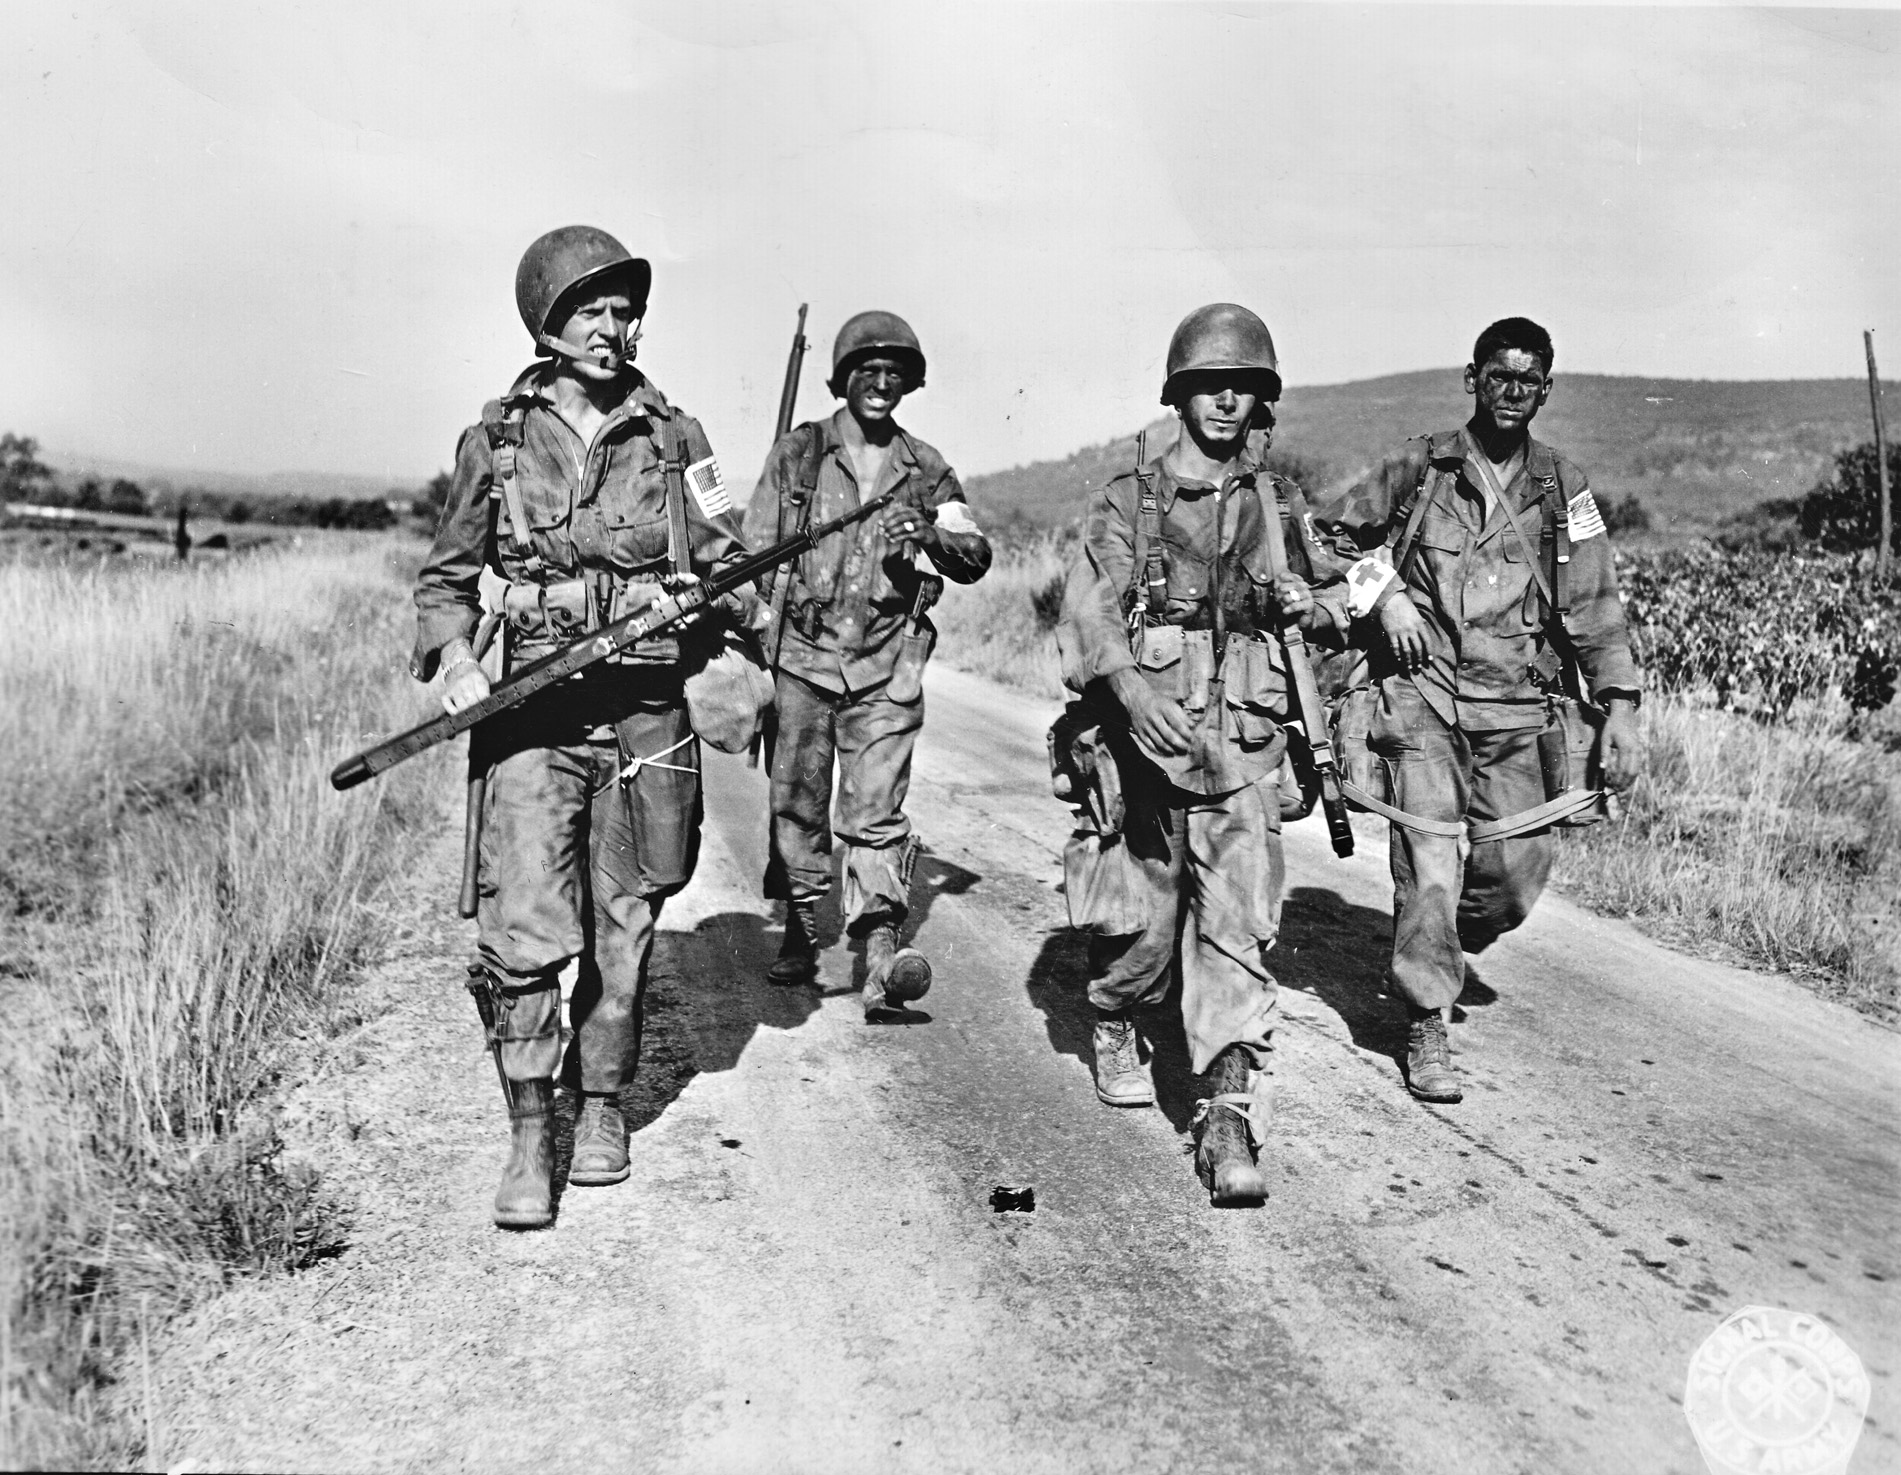 During their successful effort to prevent German reinforcements from reaching the invasion beaches on the southern coast of France, American paratroopers of the 509th Parachute Infantry Battalion rush down Route D7 near the French town of Le Muy.